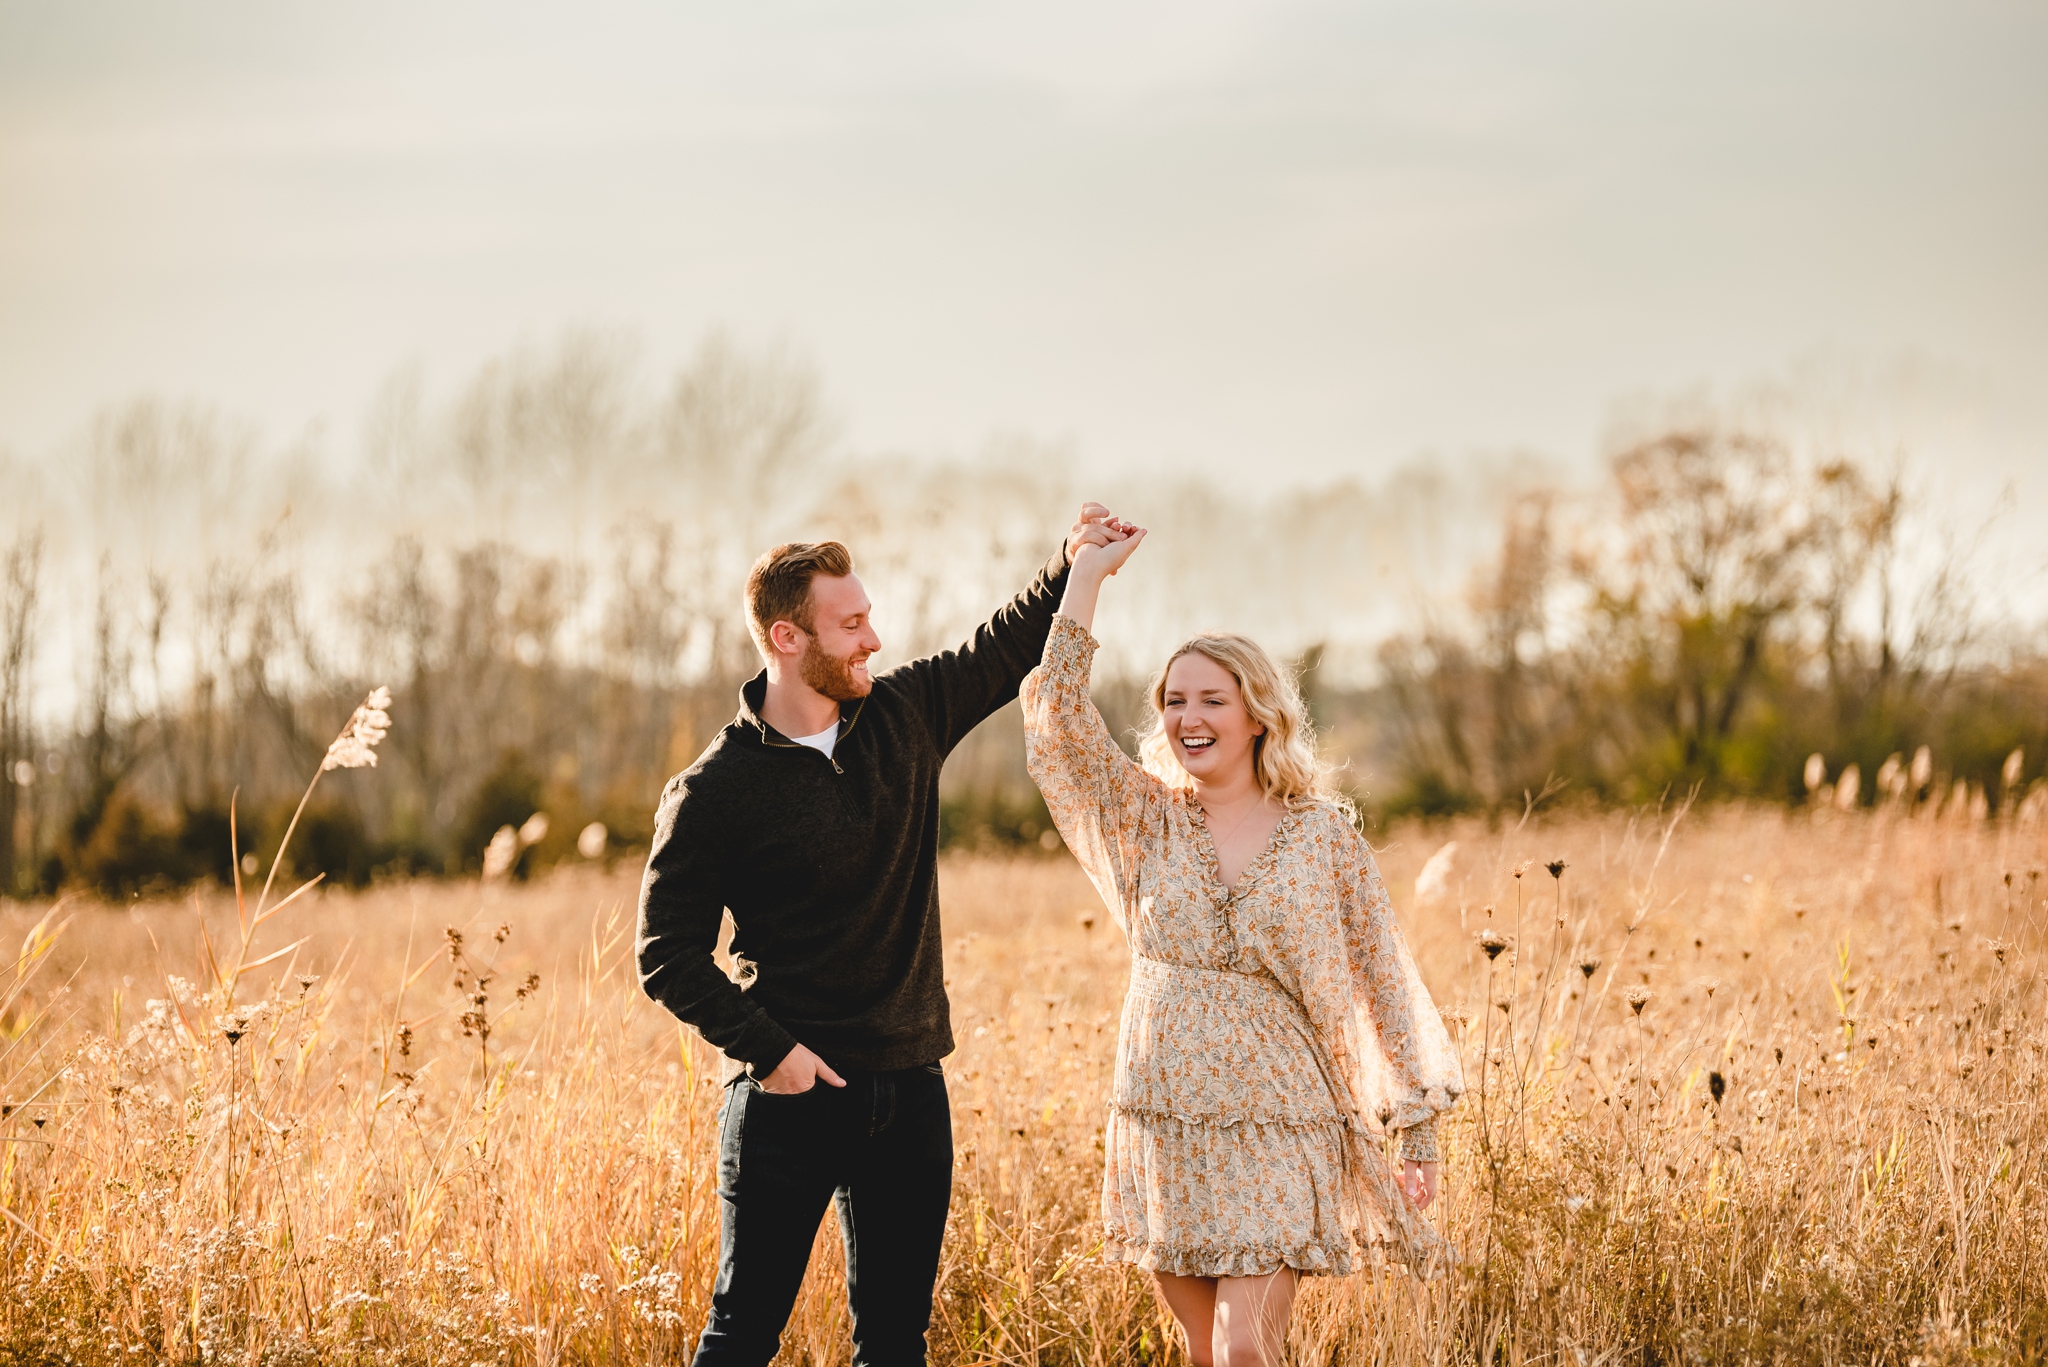 A sunny Doty Park engagement session in Neenah, Wisconsin 